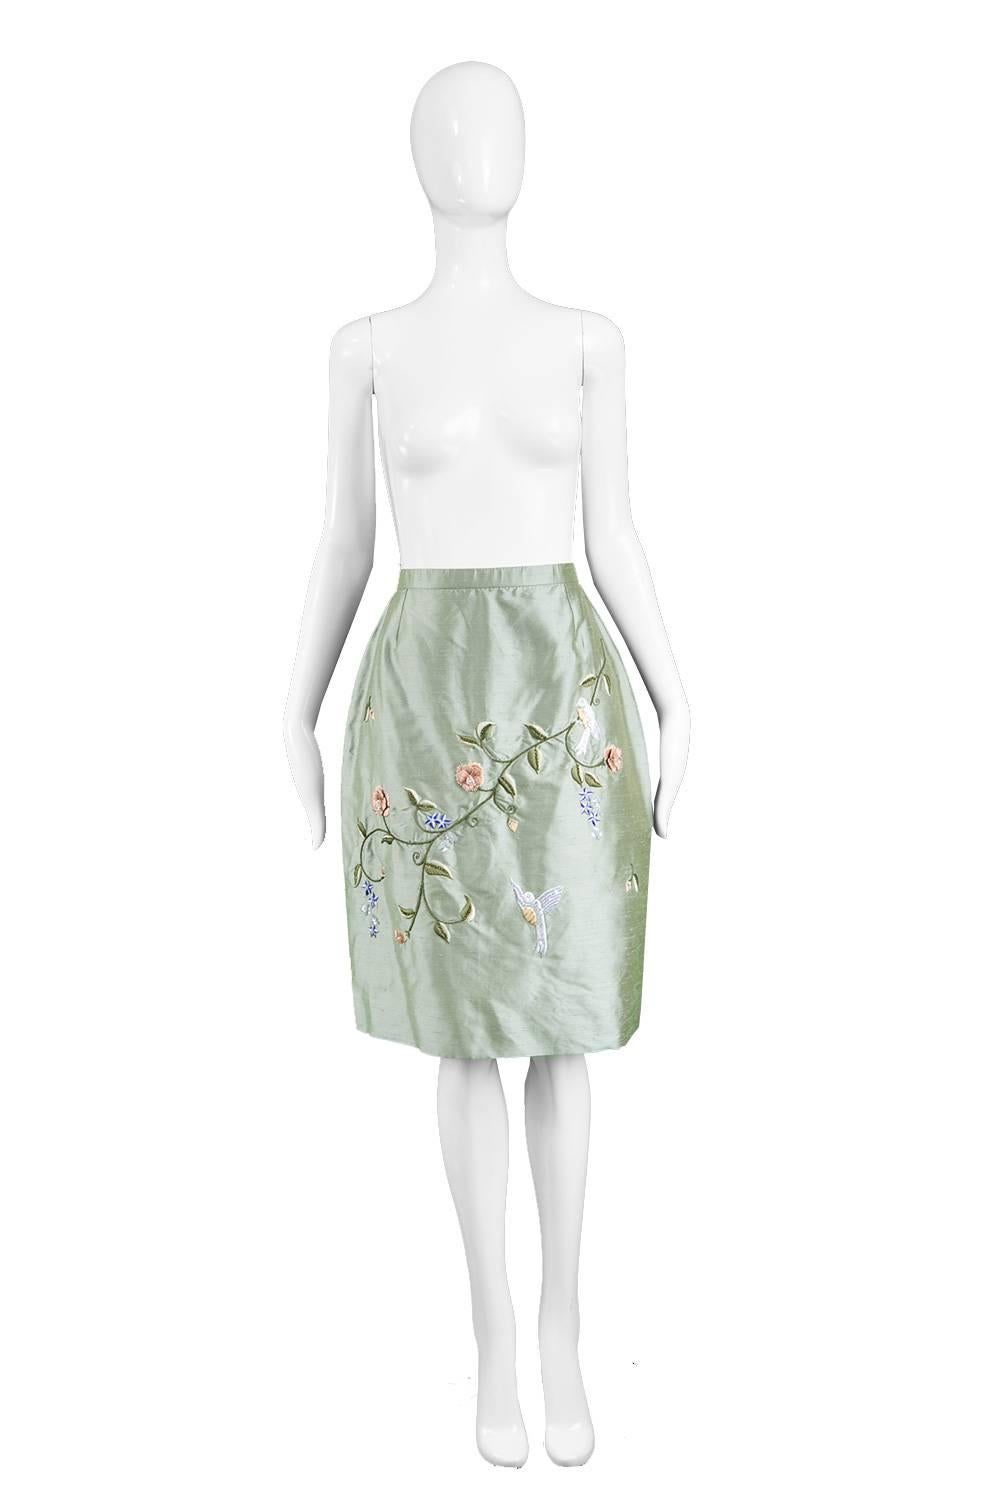 Belville Sassoon Asian Embroidered and Beaded Green Pure Silk Skirt, 1980s

Estimated Size: UK 10-12/ US 6-8/ EU 38-40. Please check measurements.
Waist - 29” / 73cm
Hips - Up to 44” / 112cm
Length (Waist to Hem) - 25” / 63cm

Condition: Excellent